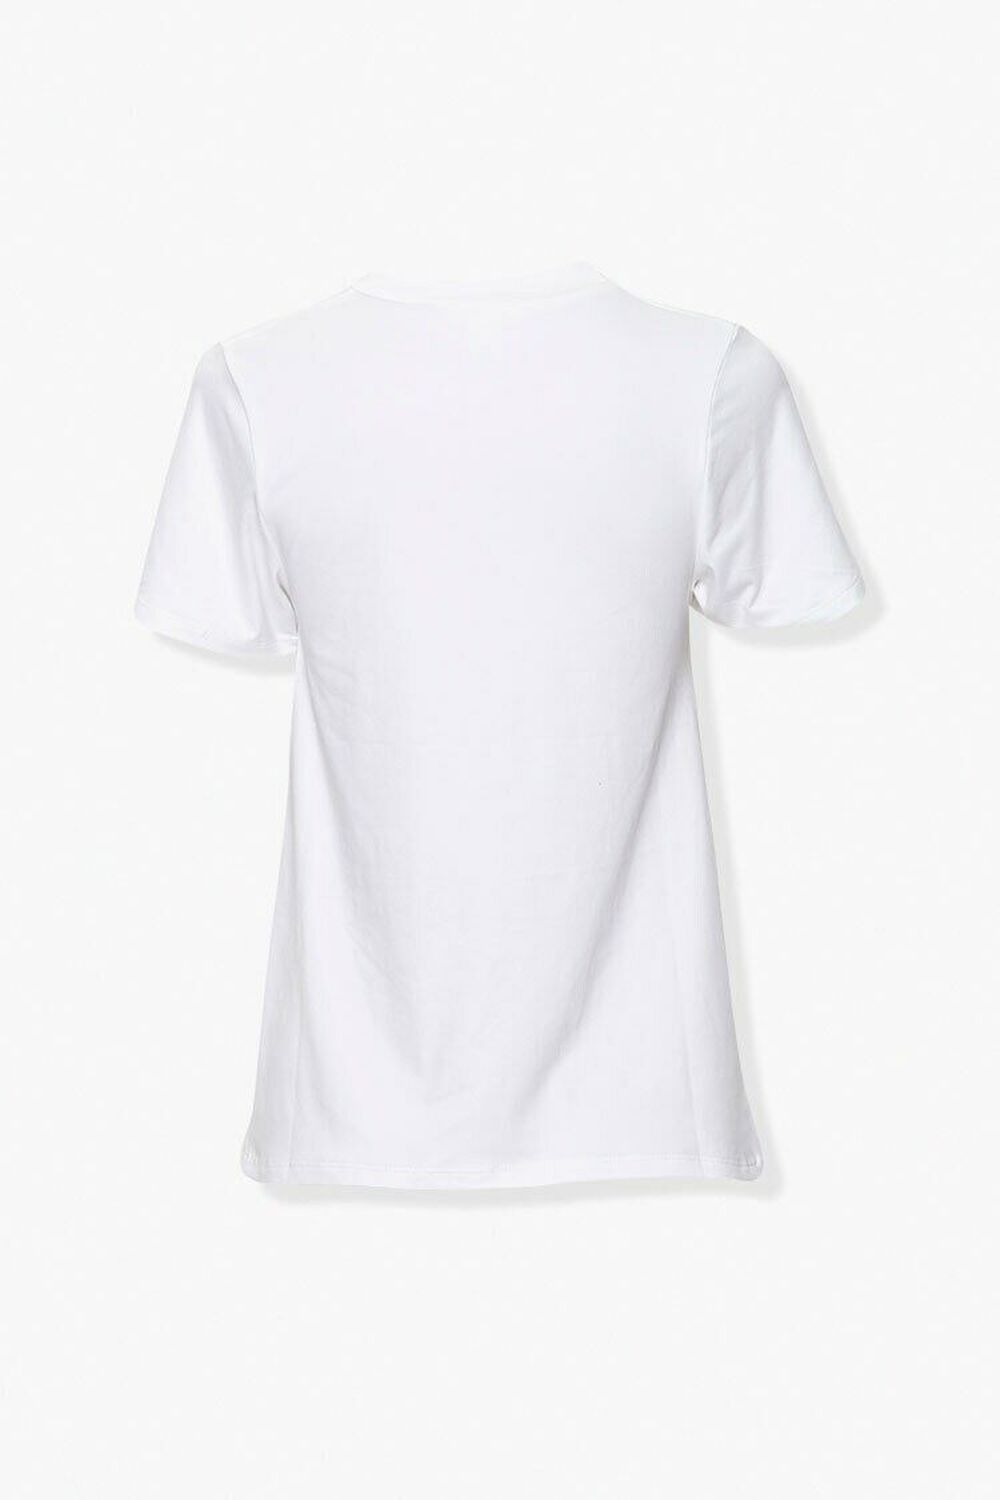 WHITE Knotted Self-Tie Tee, image 3